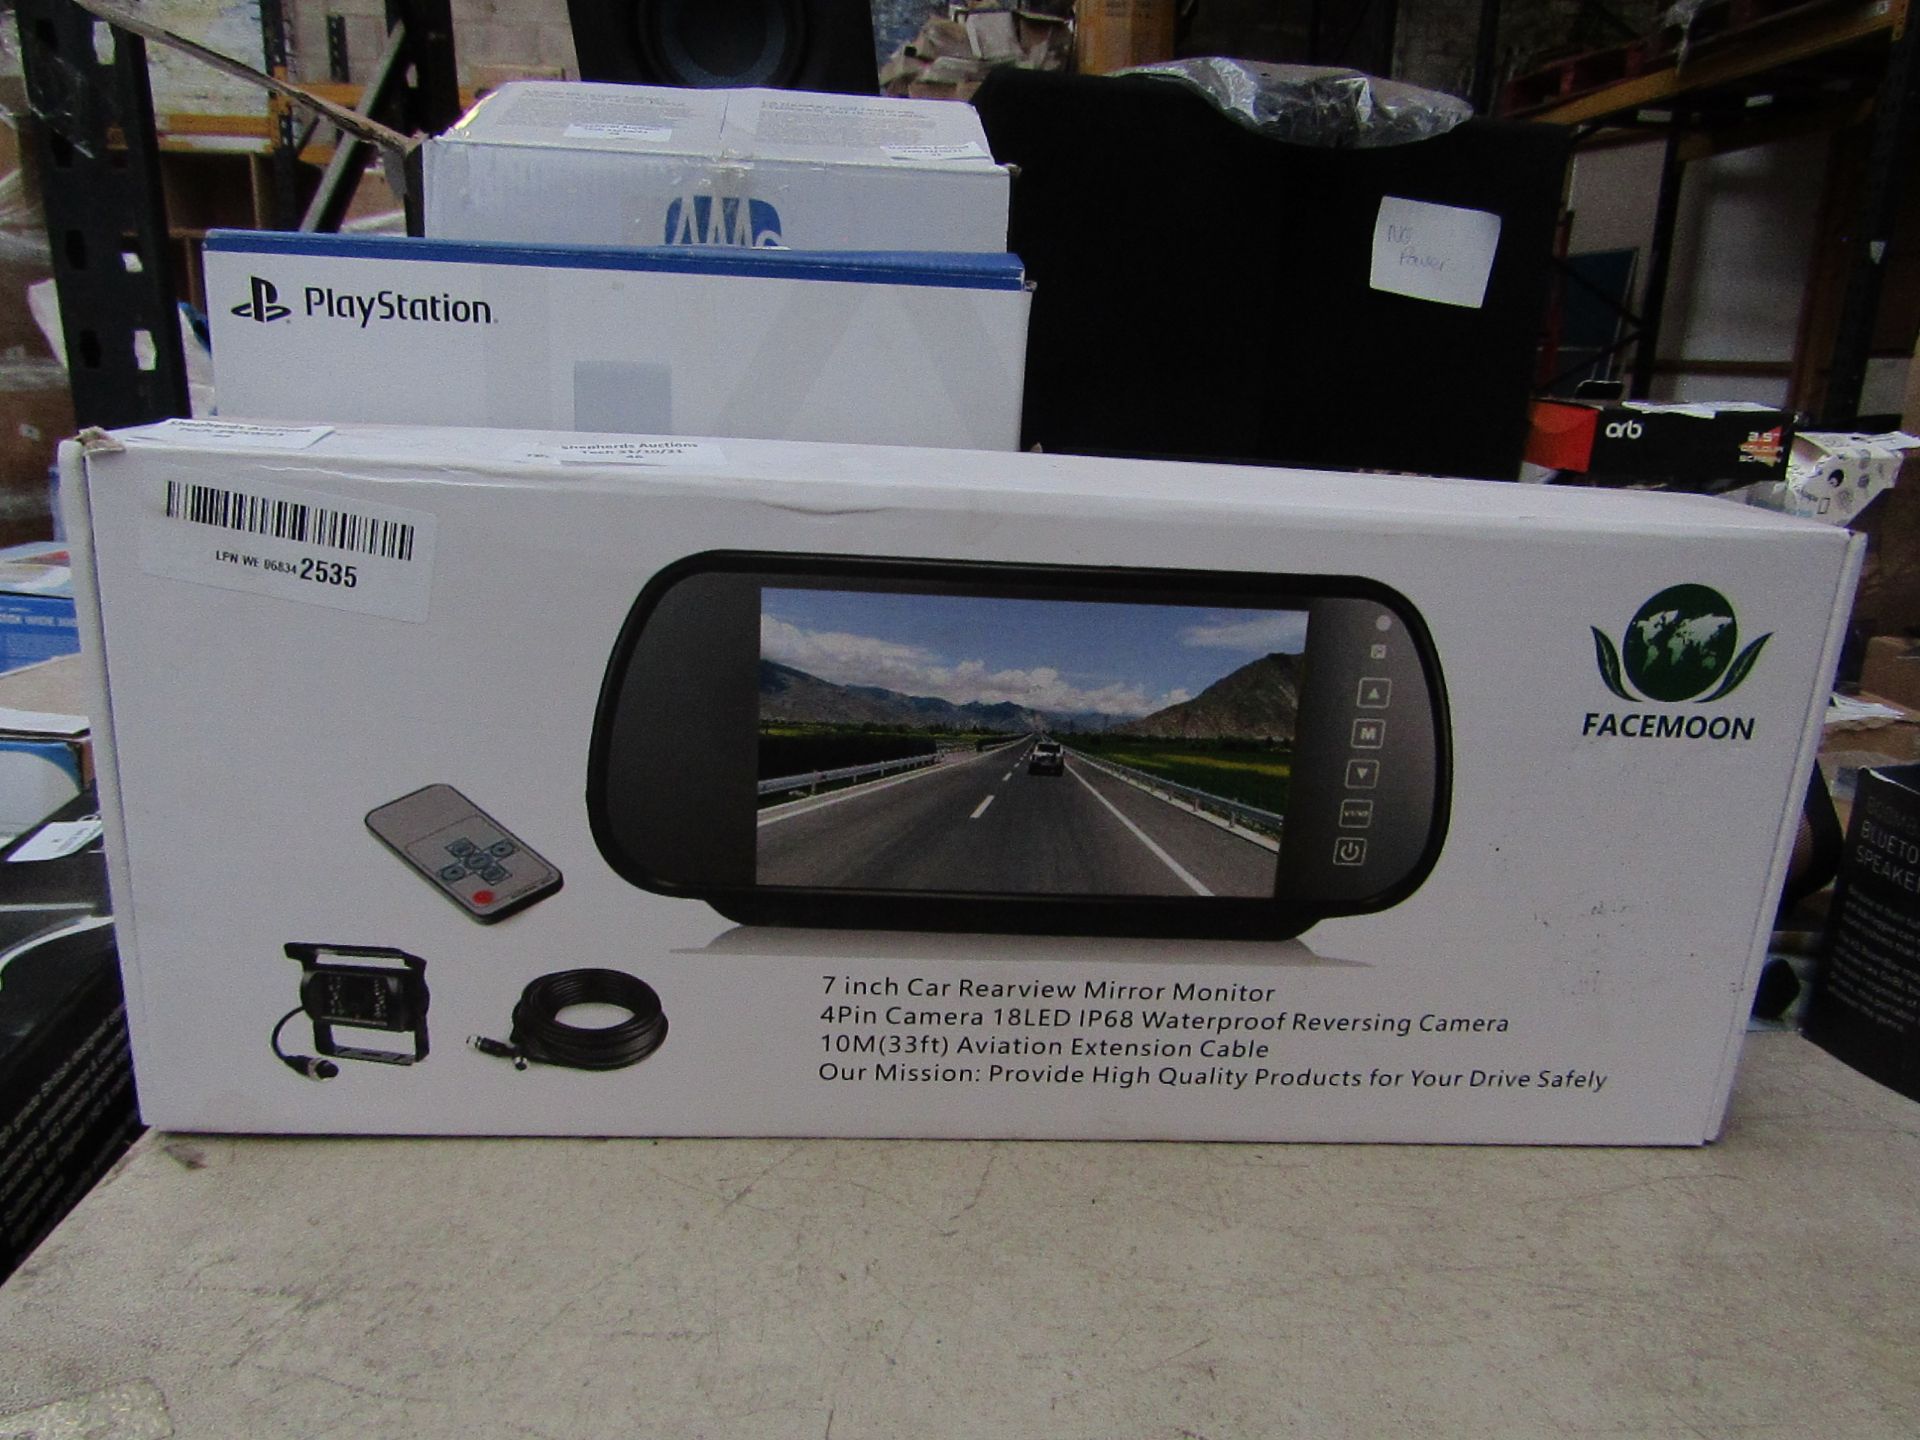 Facemoon 7inchh Car Rearview Mirror Monitor - Unchecked & Boxed - RRP £90